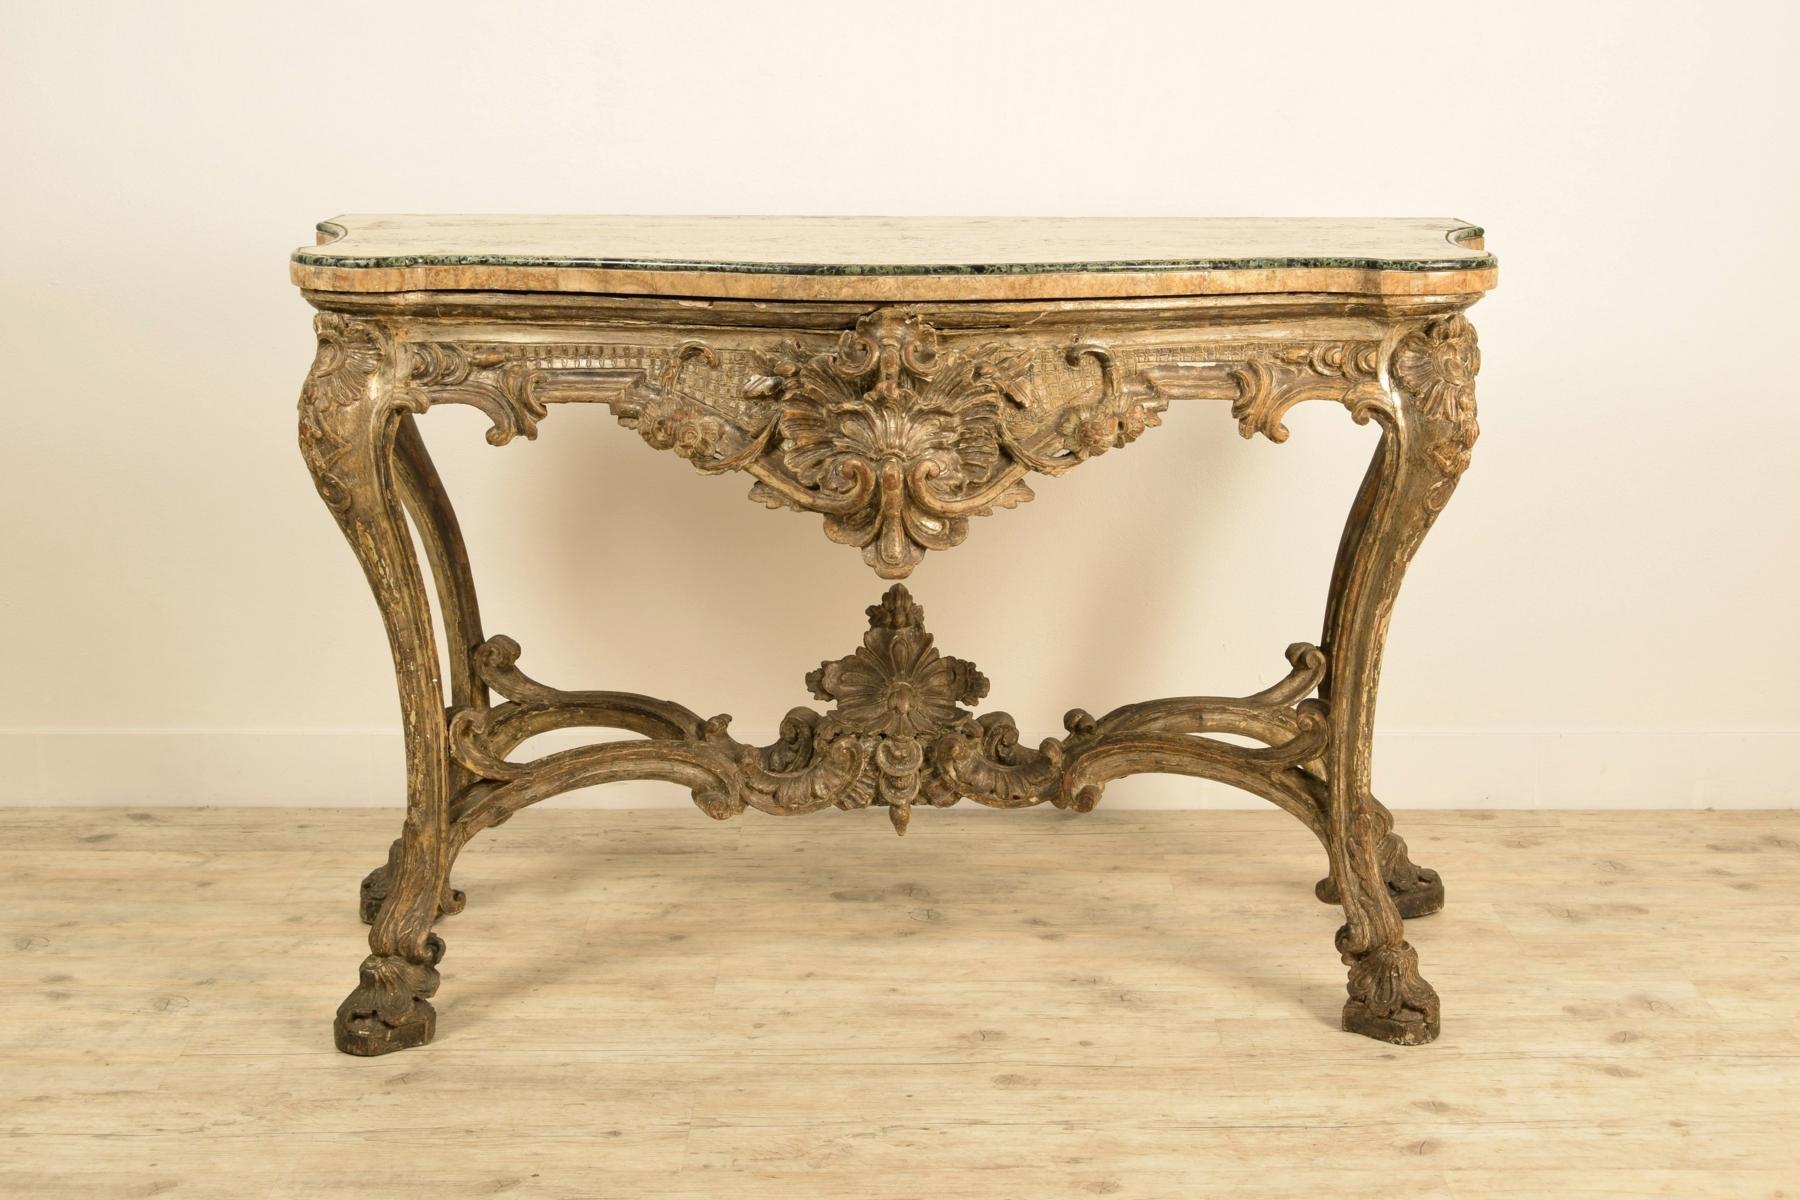 Italian carved and silvered wood consolle
Naples, Italy, early 18th century

This finely carved and silvered wooden console table is a remarkable example of the decorative repertoire typical of Louis XIV, with elements of particular sumptuousness